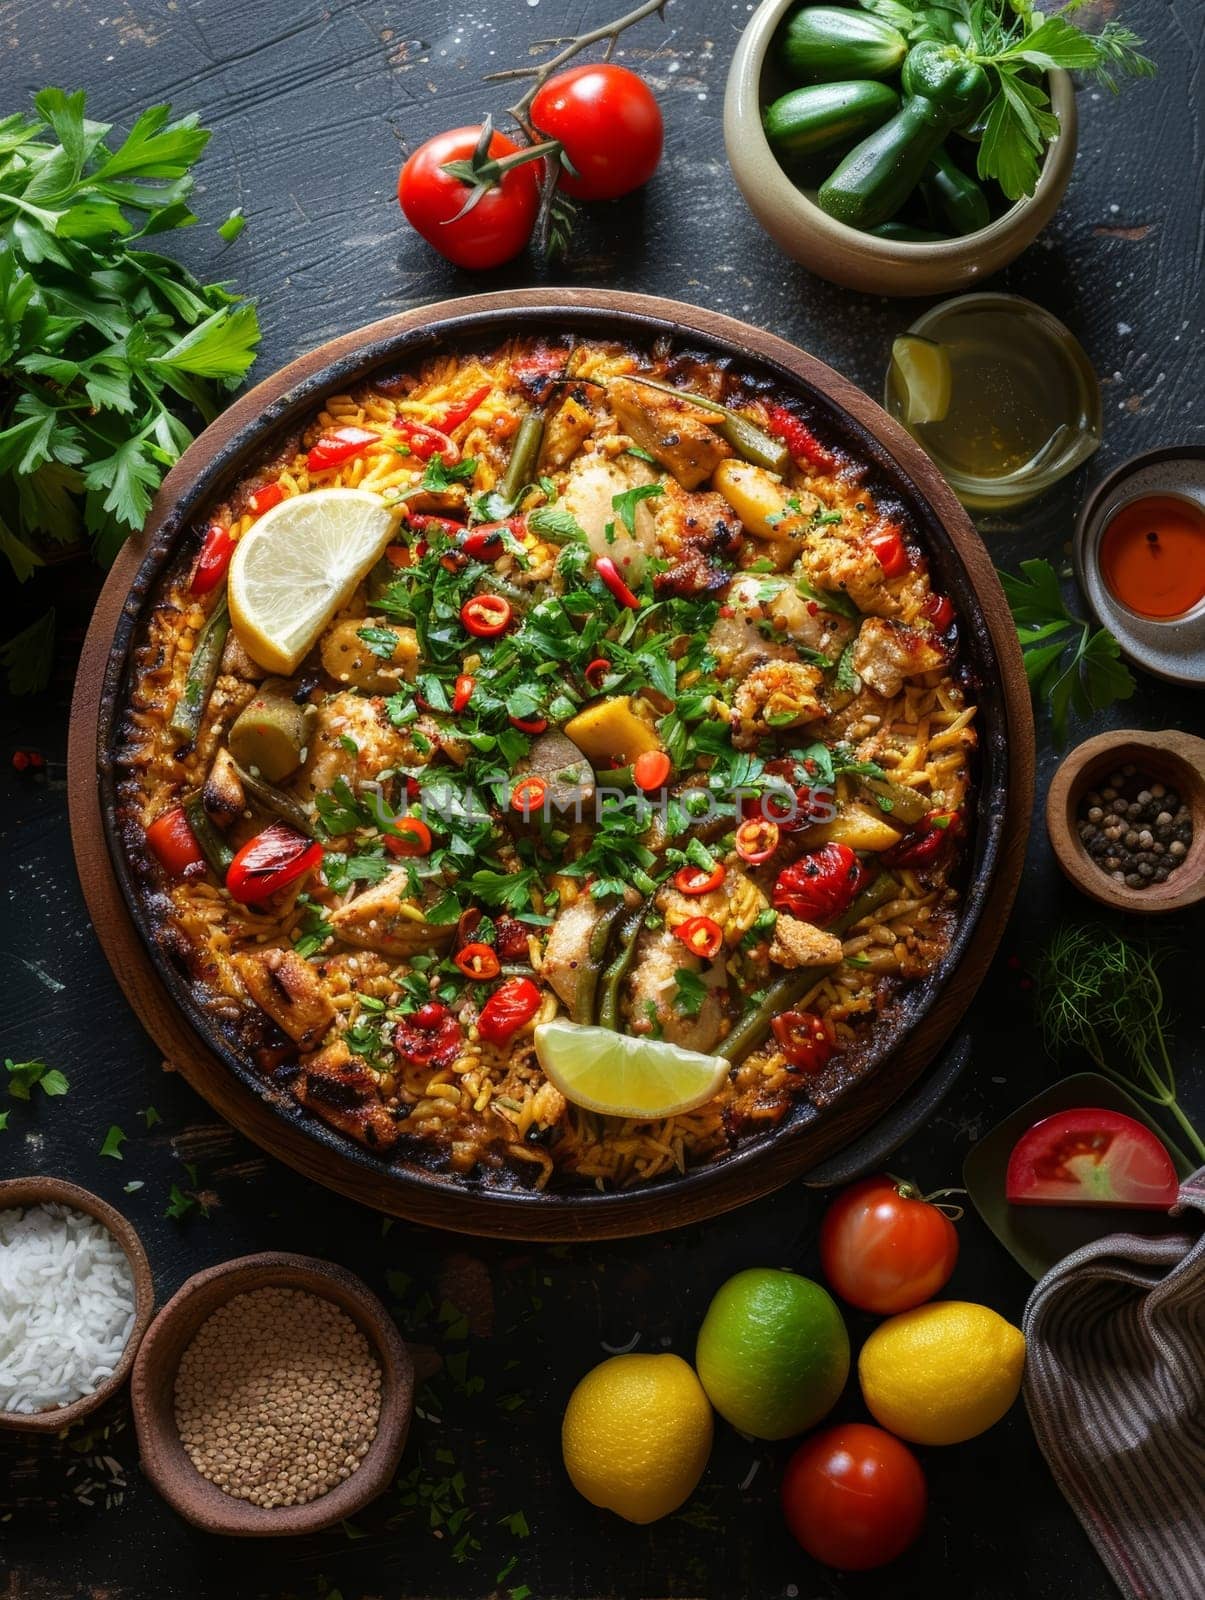 Maqluba, a traditional Palestinian upside-down rice dish, featuring layers of fluffy basmati rice, tender chicken, and a variety of aromatic vegetables, presented in a large serving dish